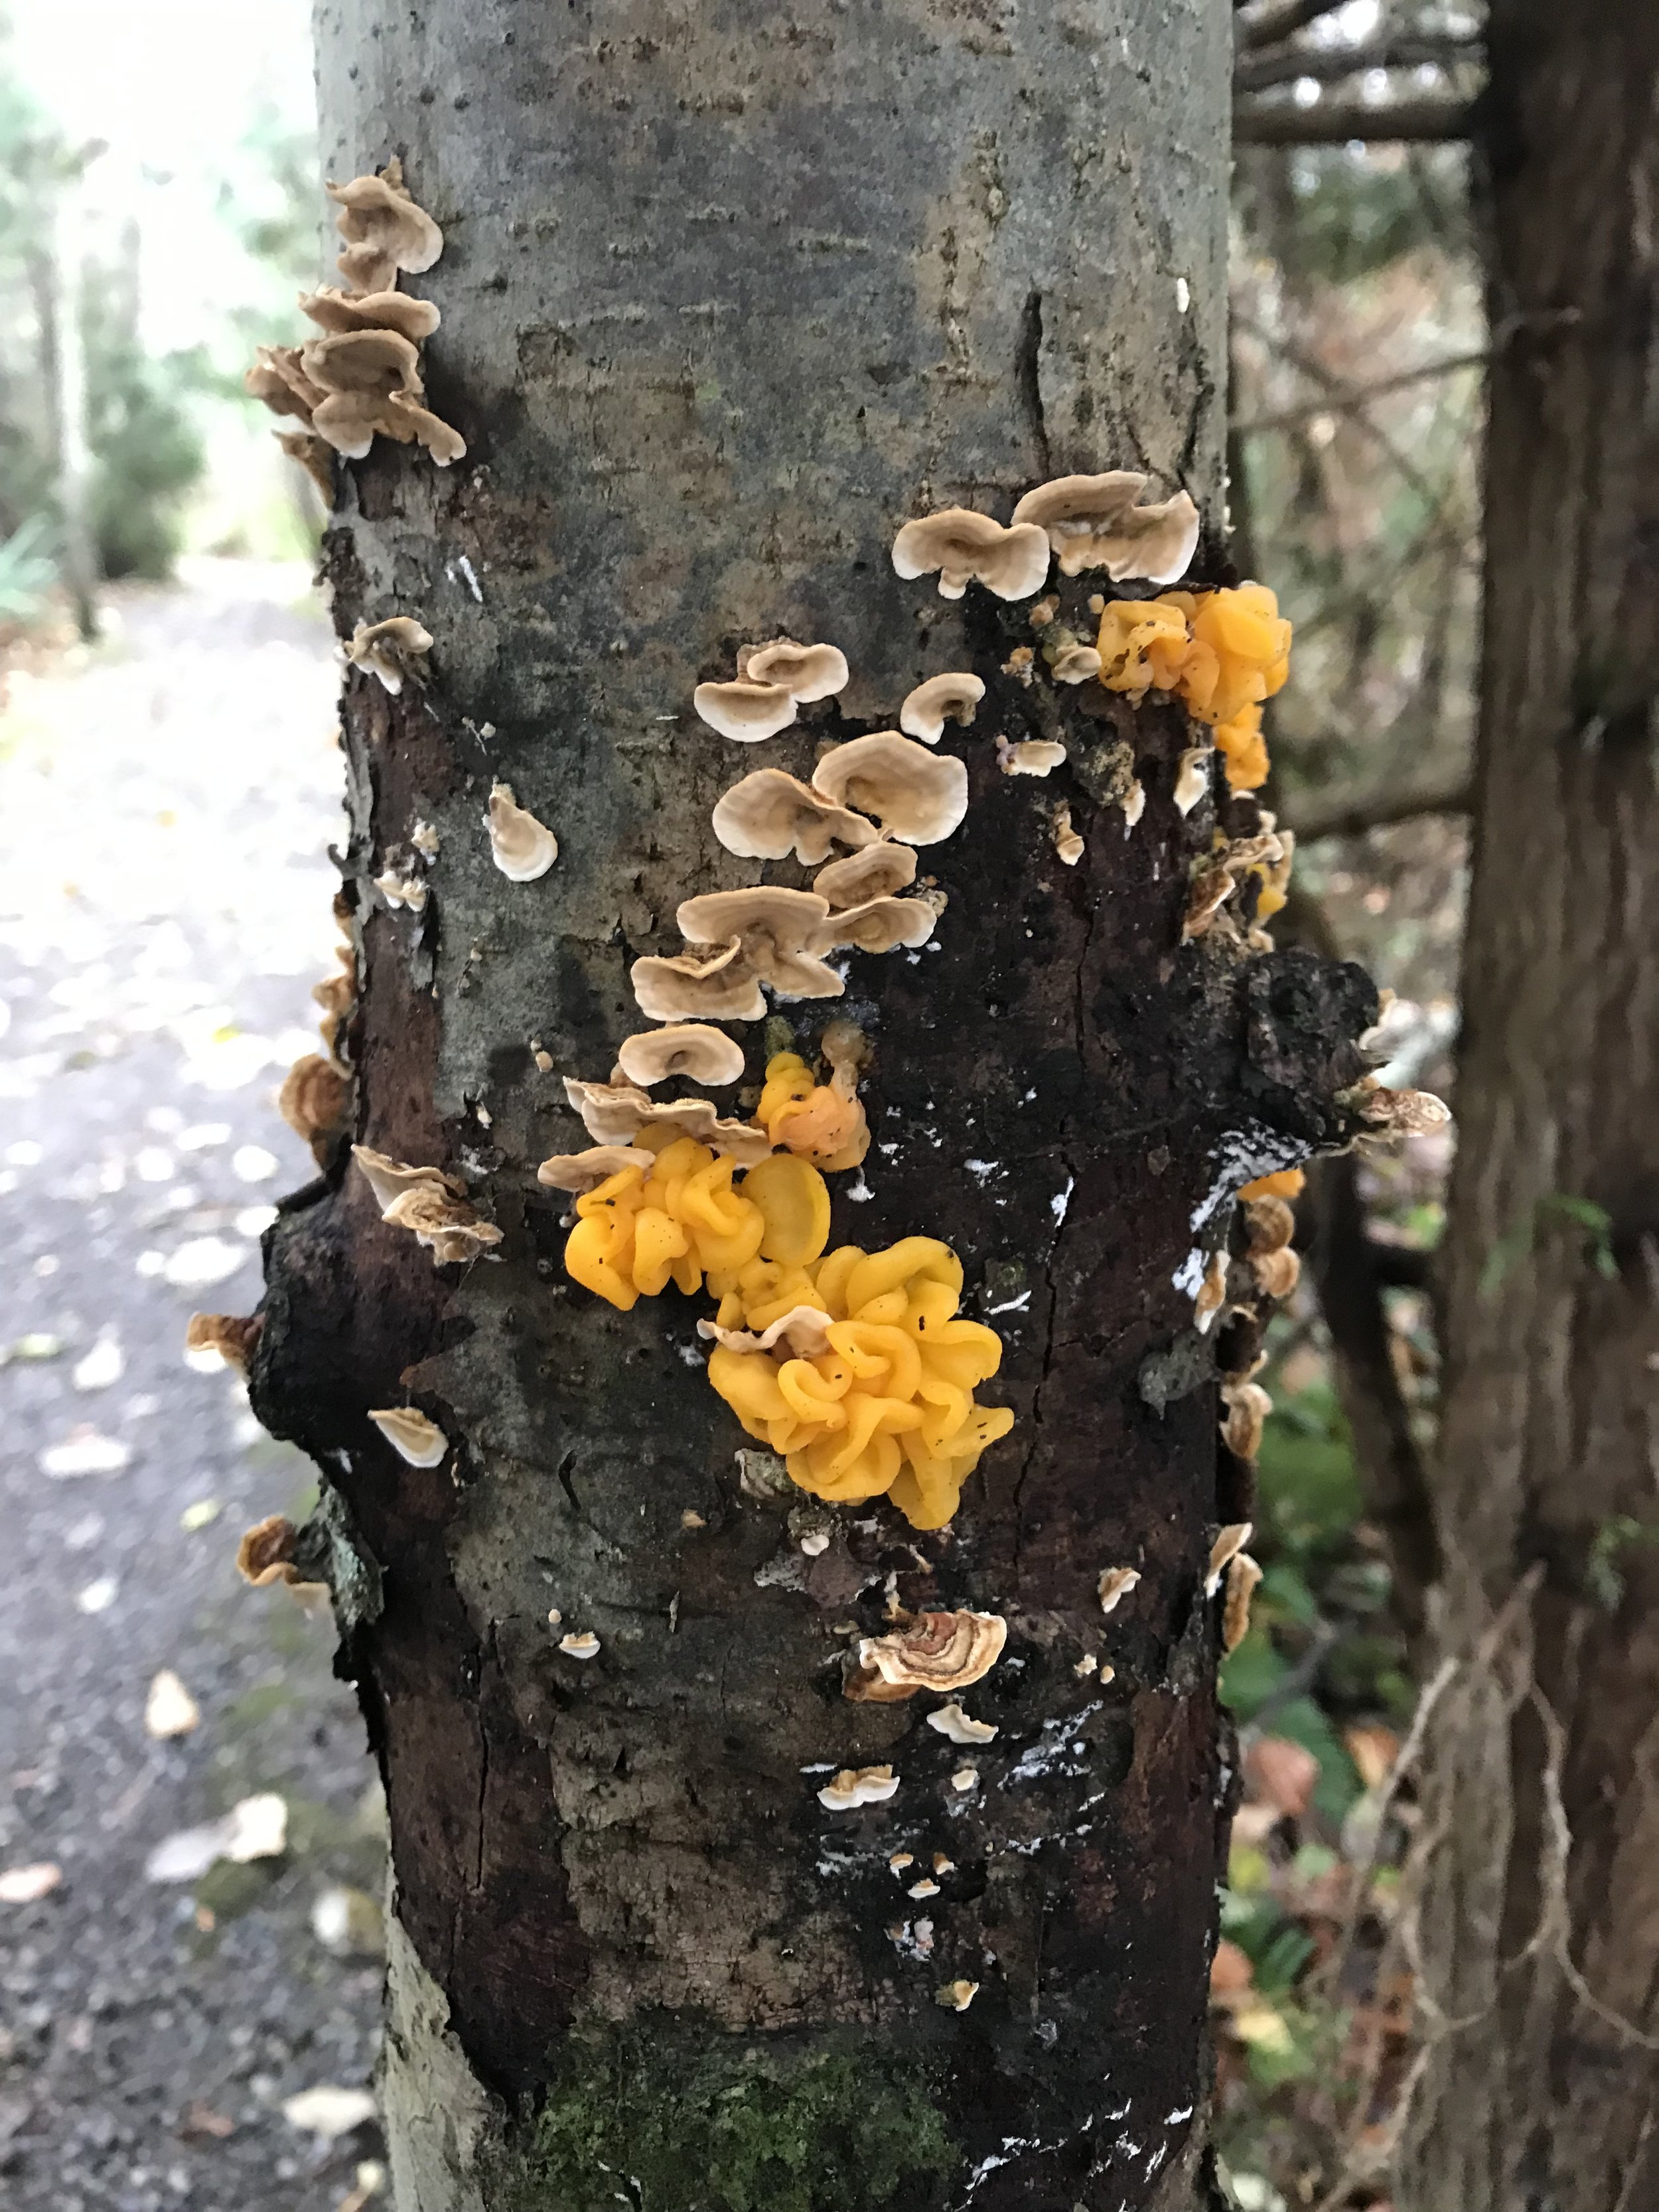  Nobody planned for this orange “witch’s butter” to sprout up in these water-loving woods. 